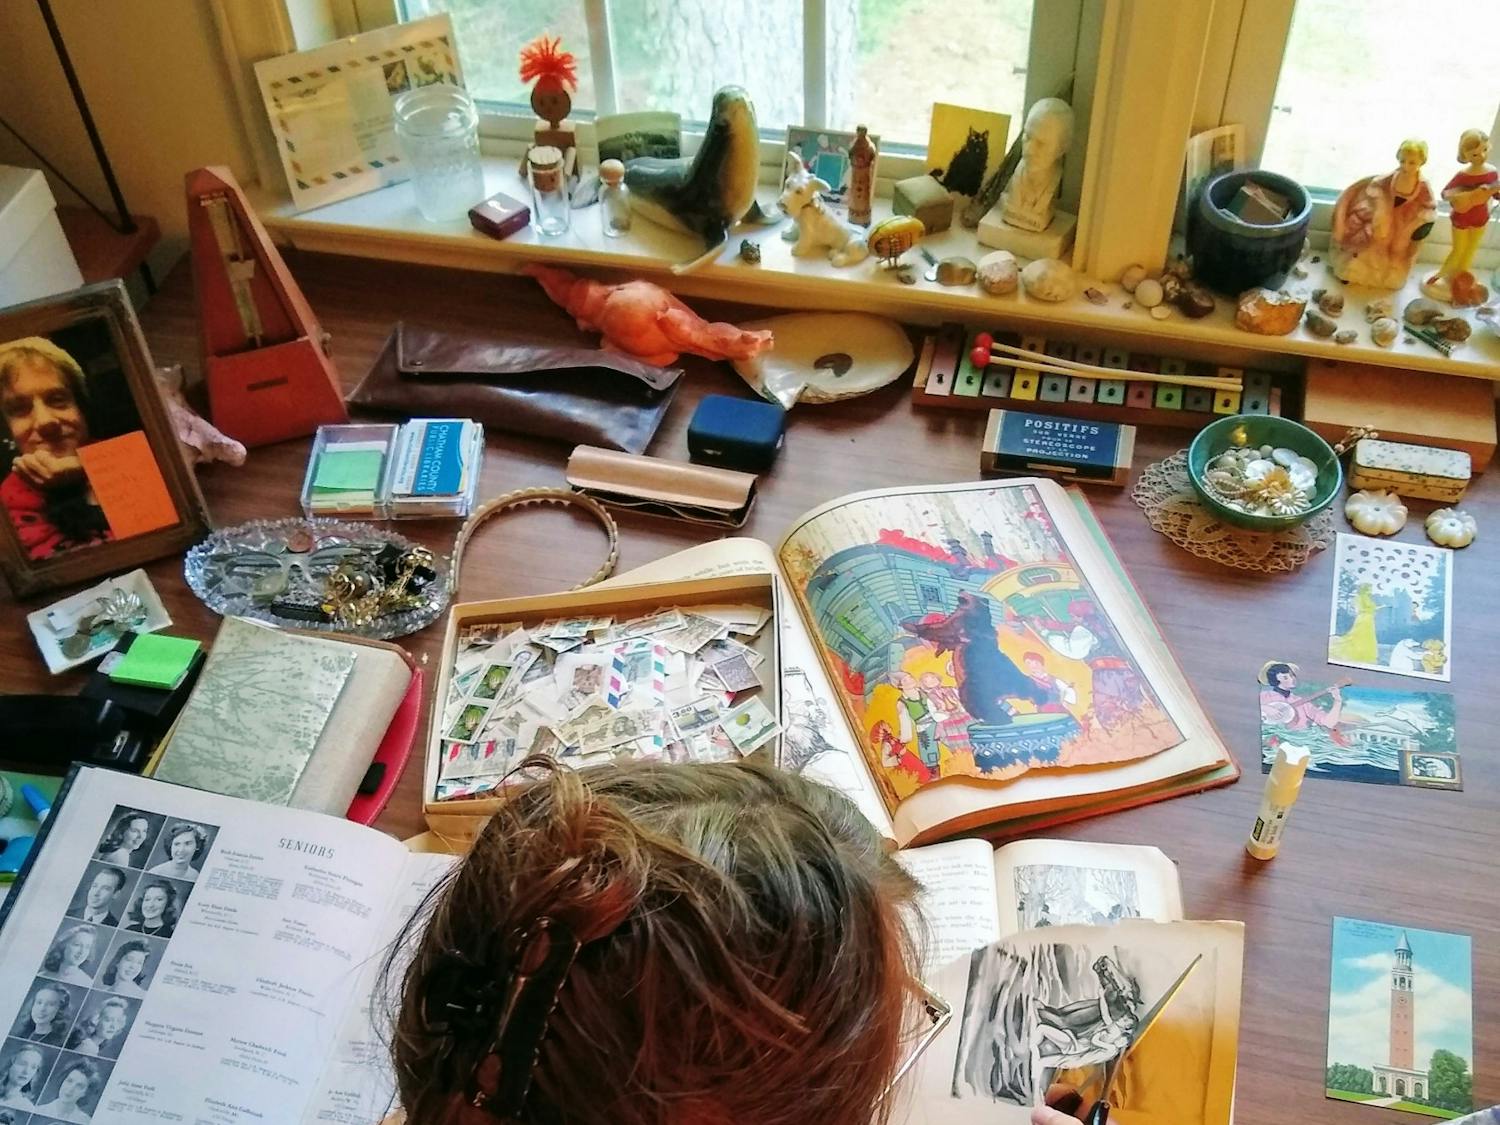 Artist Wendy Spitzer, as known as Felix Obelix, creating artwork. Photo courtesy of Billy Sugarfix.